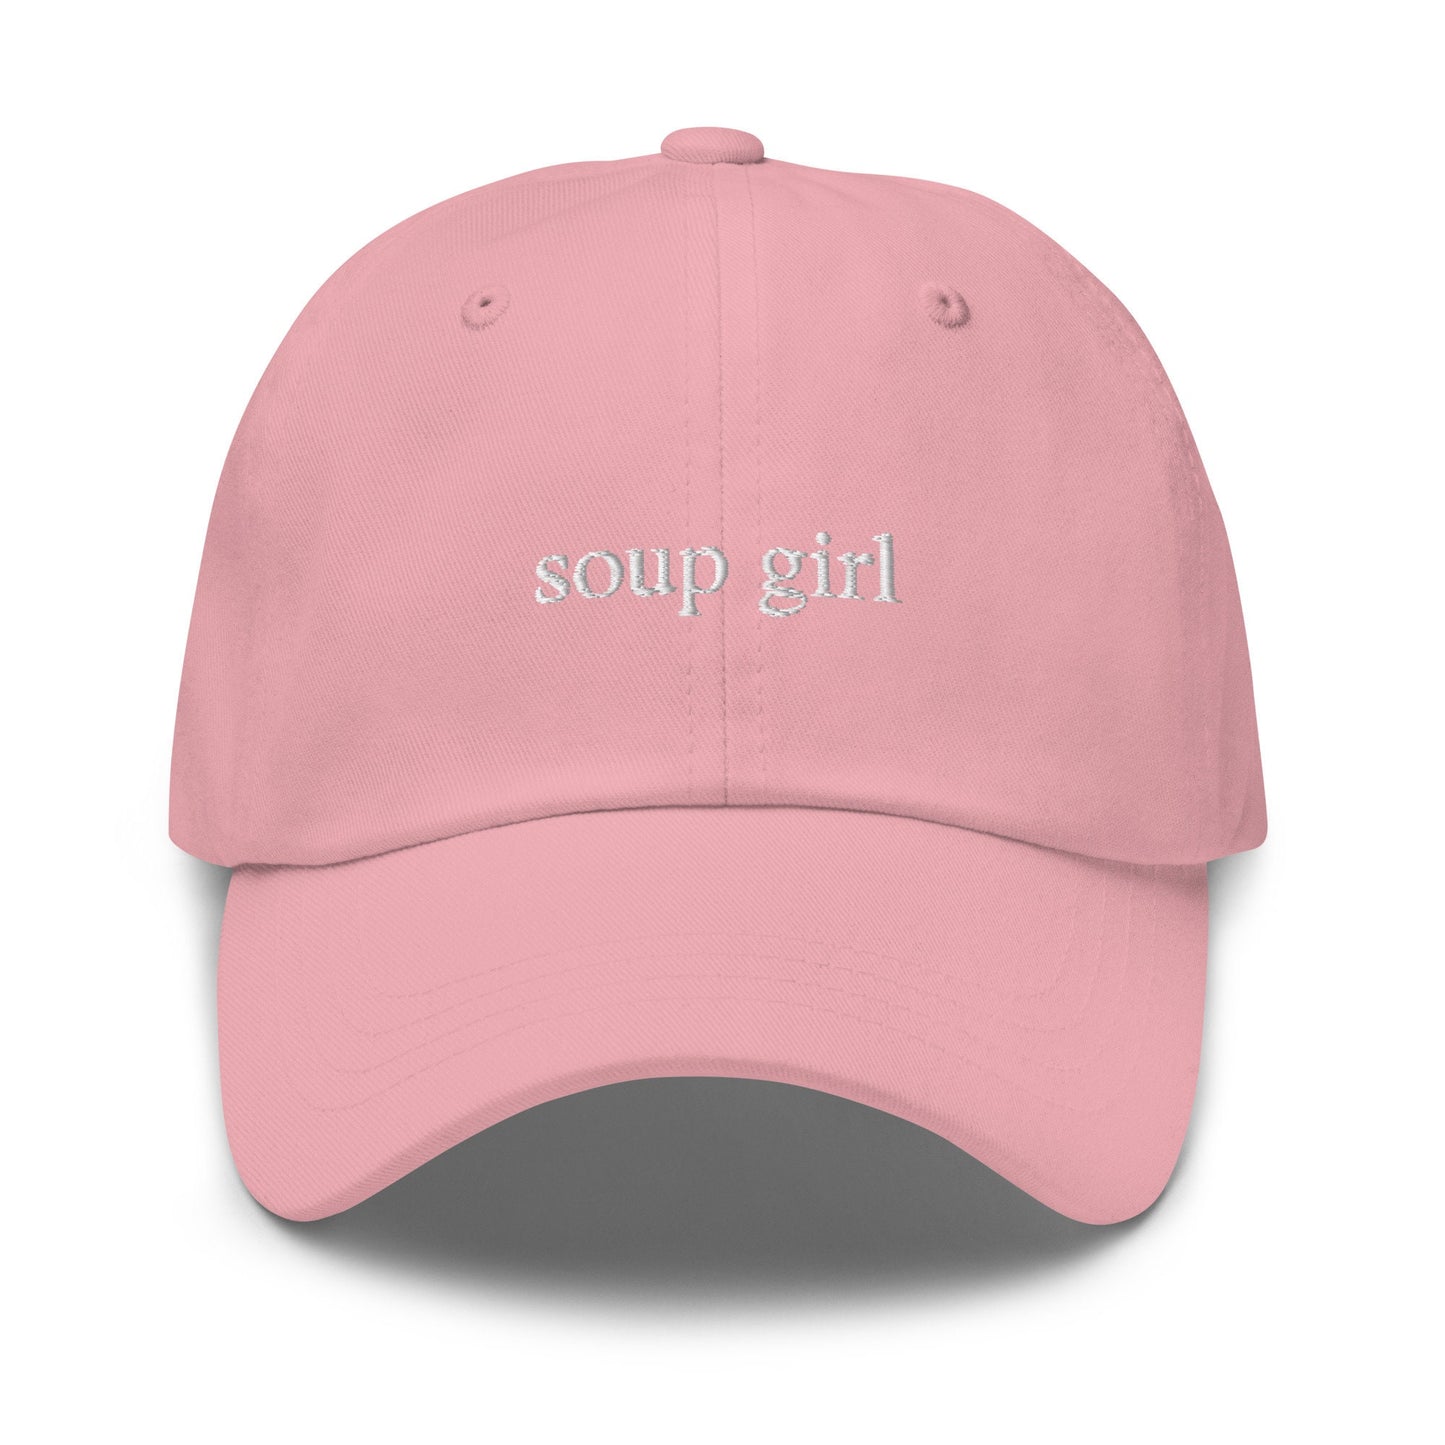 Soup Girl Hat - Cozy Season - Fall Vibes - Broth Lovers - Multiple Colors - Cotton Embroidered Dad Hat